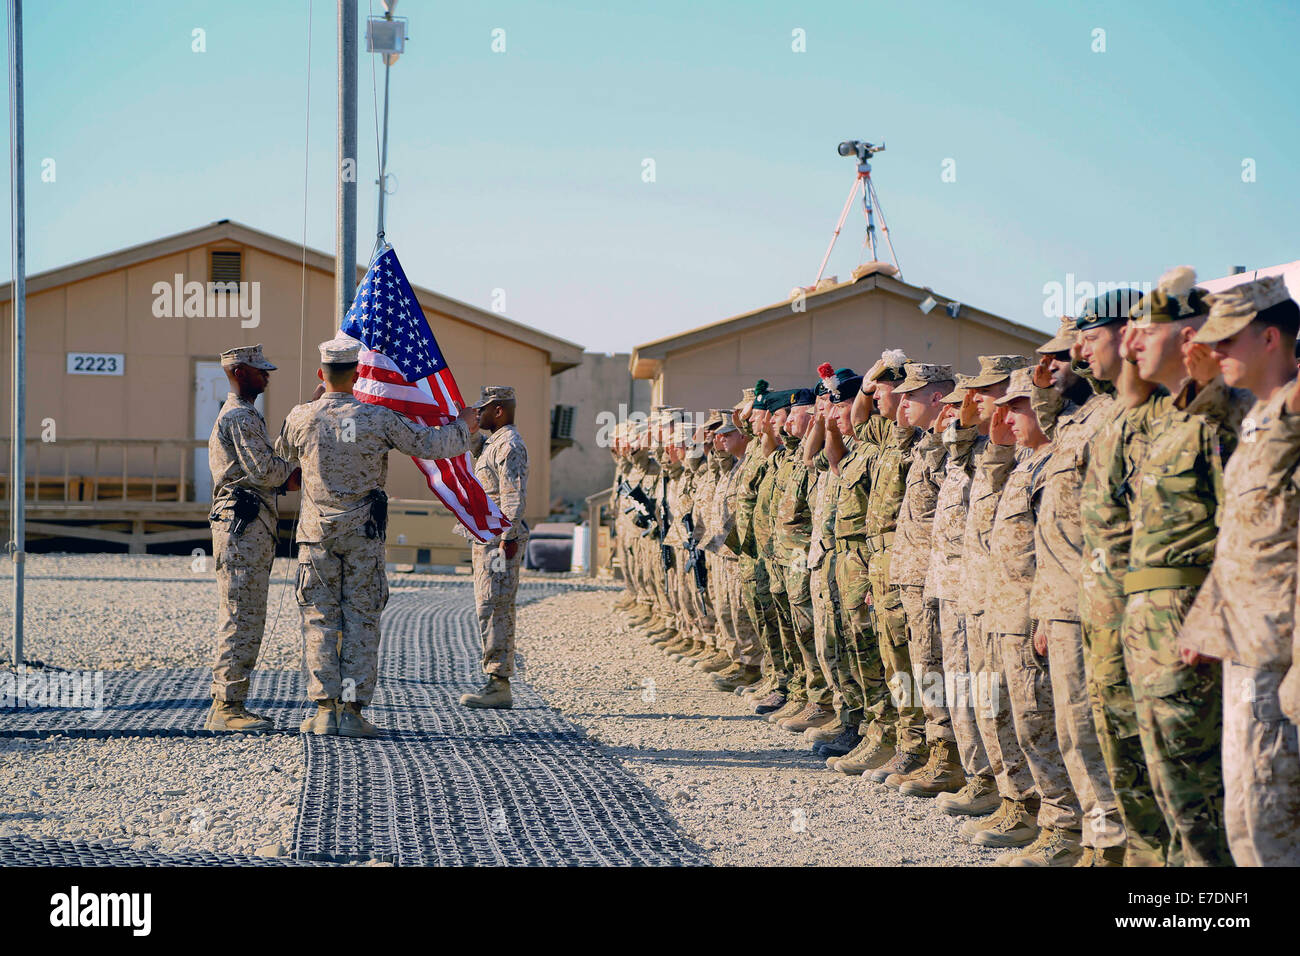 Coalition forces in Regional Command SouthWest salute as the United States flag is raised during the 9/11 commemoration ceremony September 11, 2014 in Camp Leatherneck, Helmand province, Afghanistan. Stock Photo